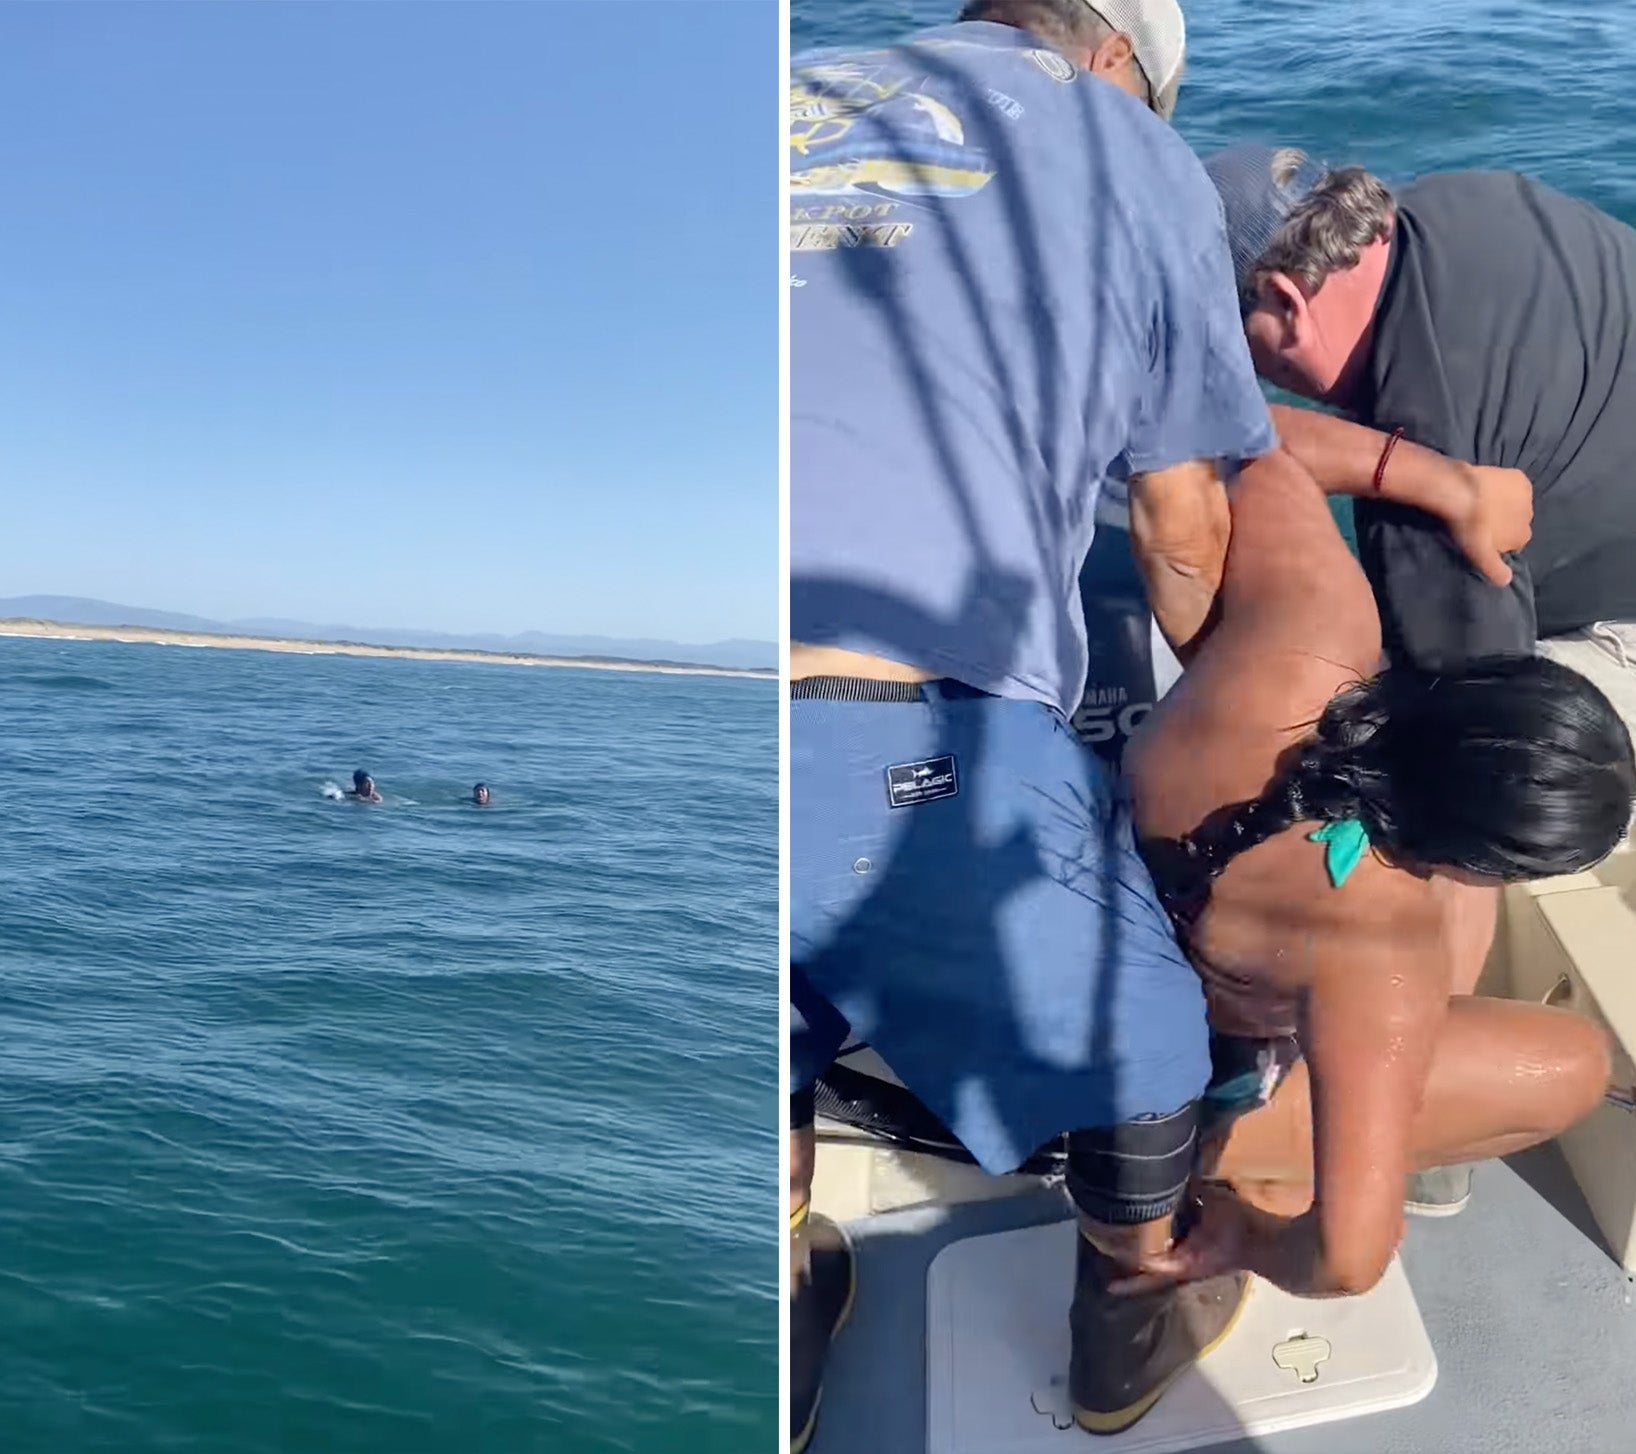 California Fishermen Save Two Teens from Drowning